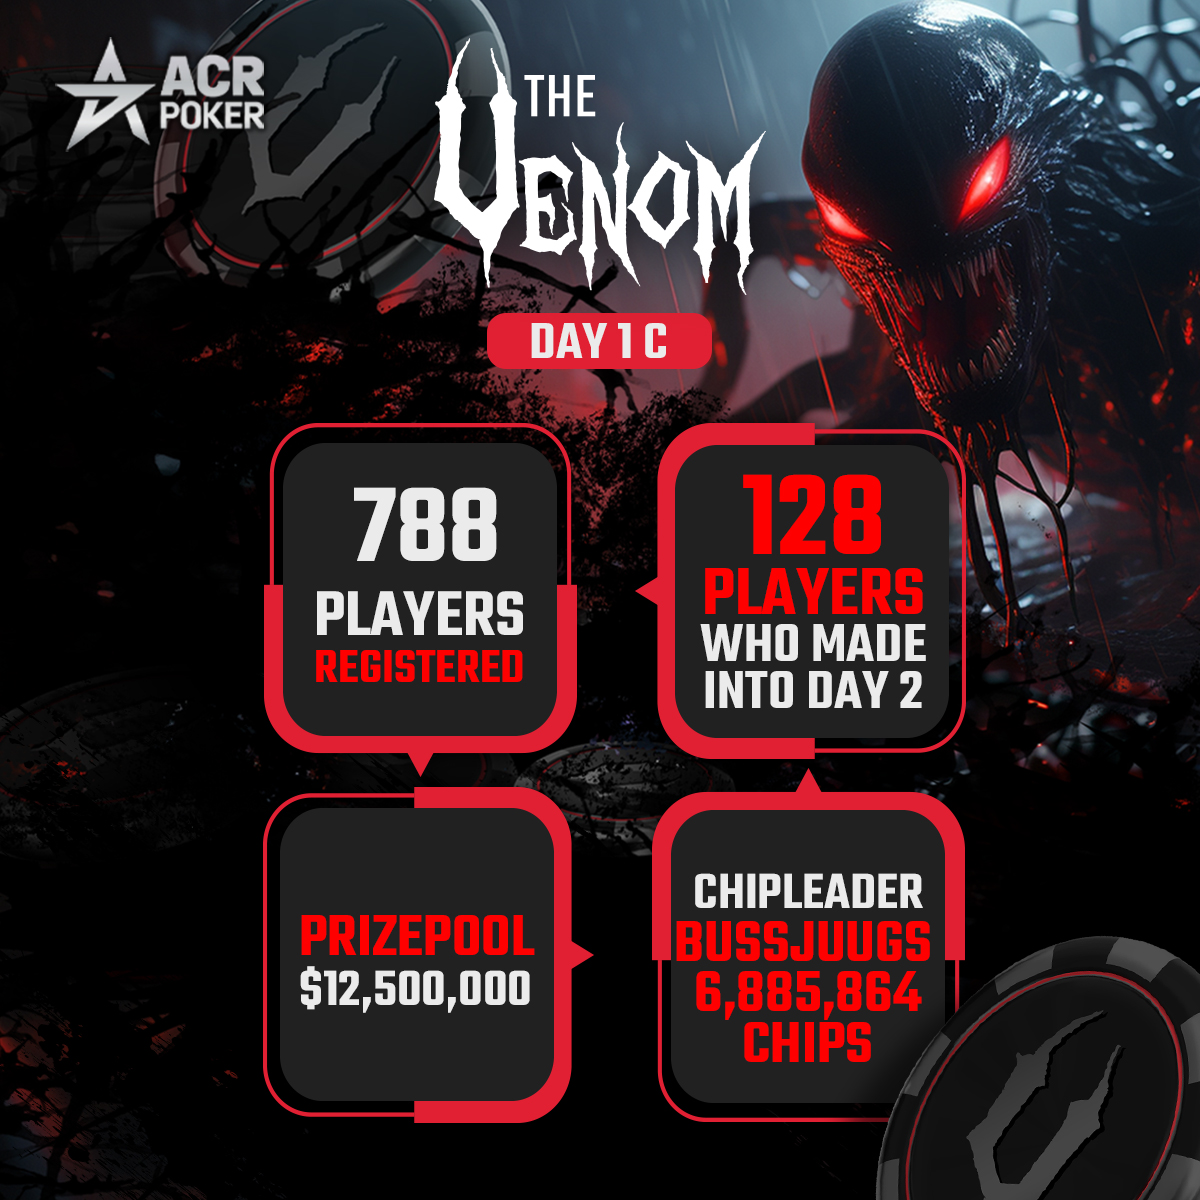 #Venom $12.5M GTD Day 1C in numbers. 💥 🗓️ Day 1D is this Thursday, April 25th at 1:05pm ET.